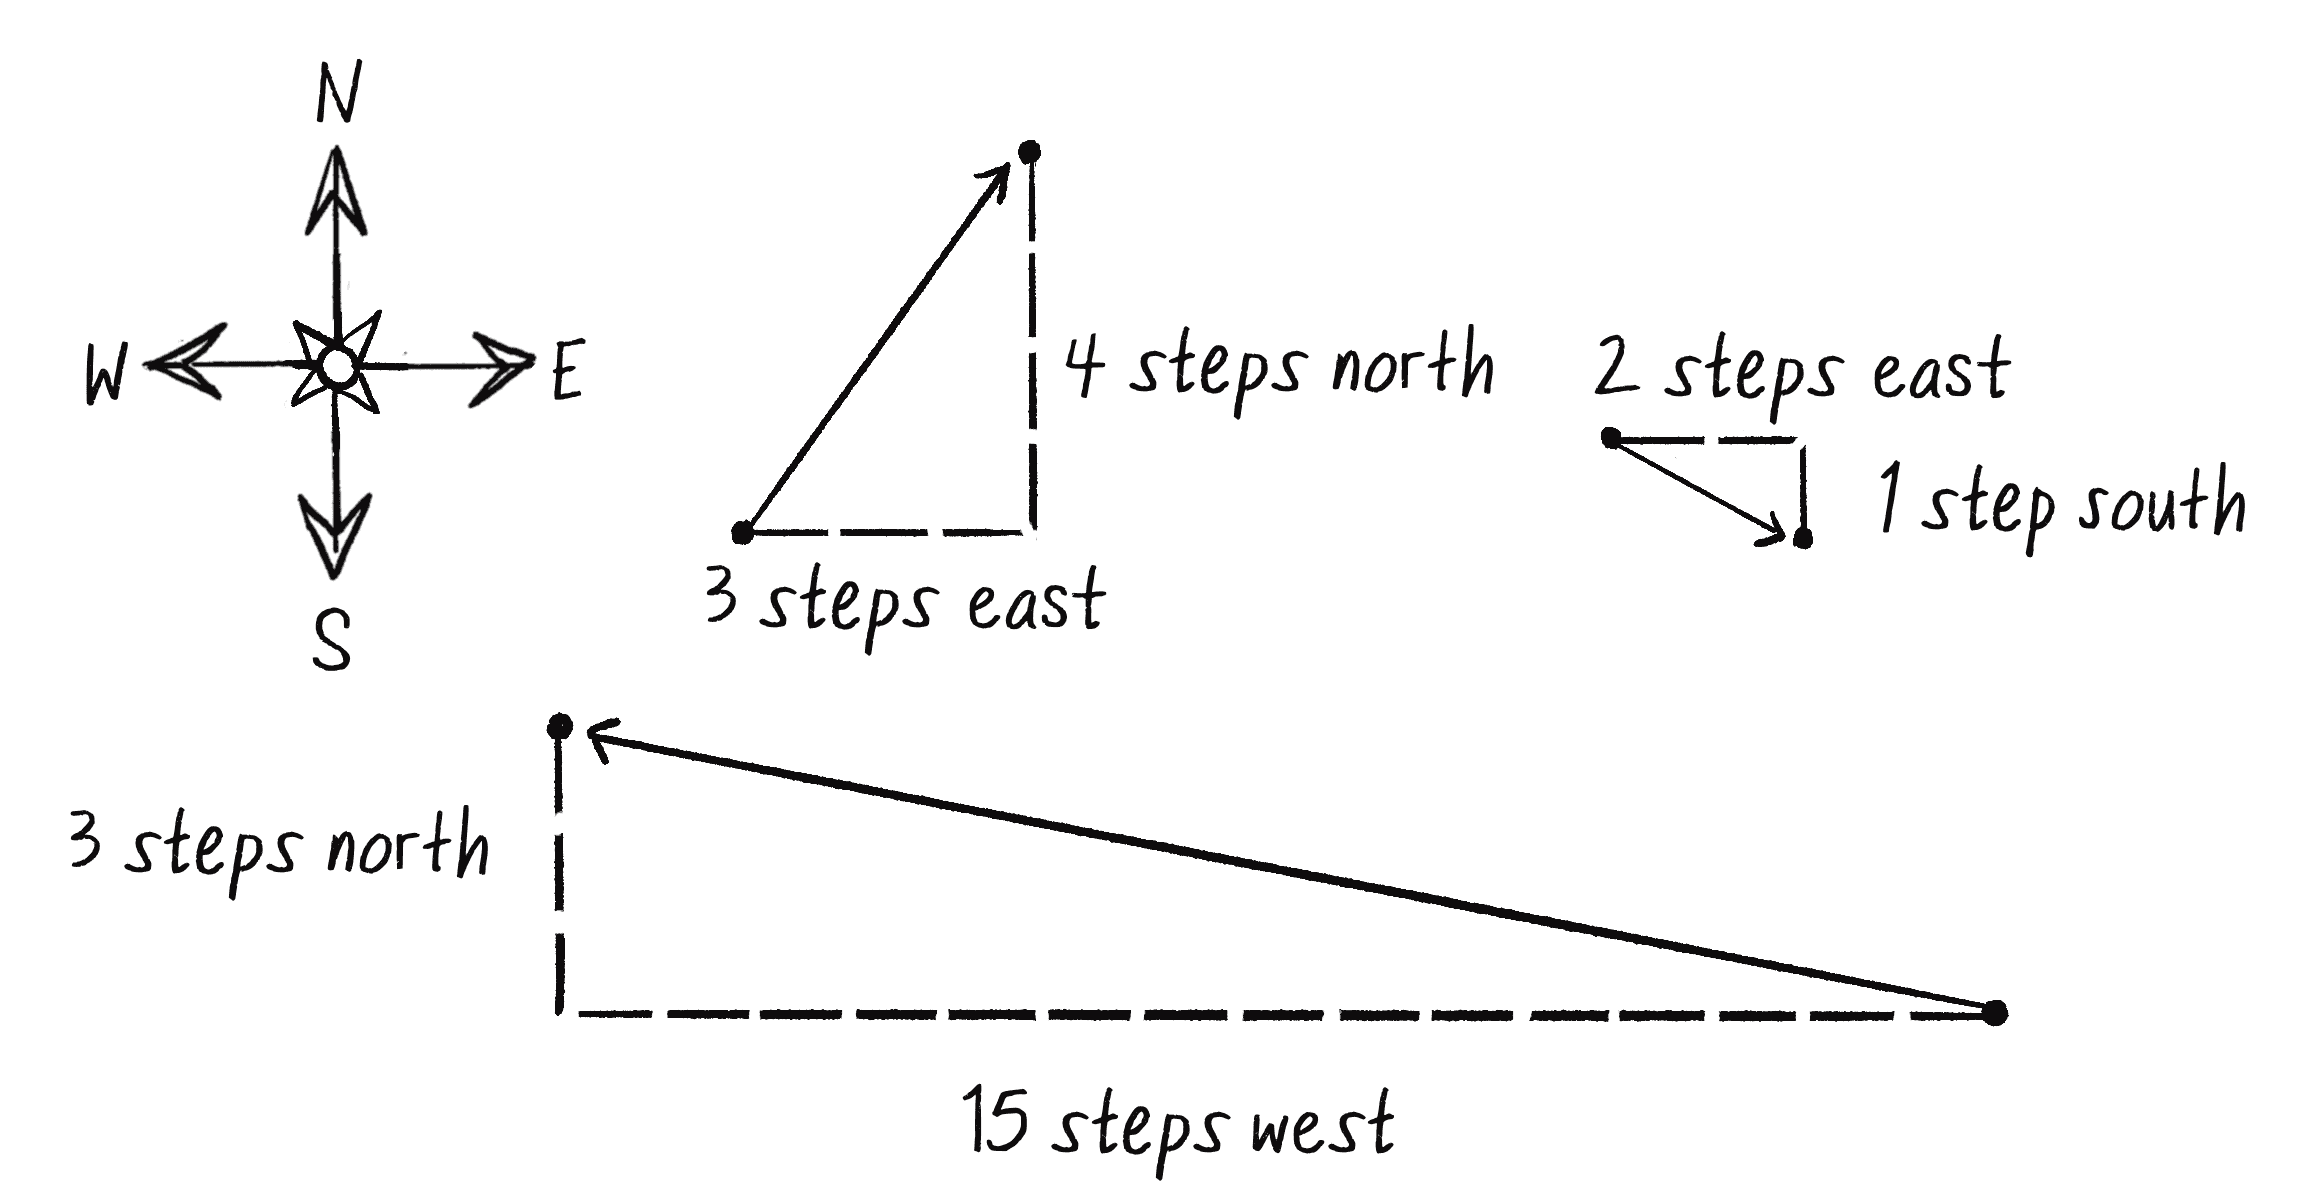 Figure 1.2: Three example vectors drawn as arrows, with accompanying instructions for walking in north, south, east, or west directions